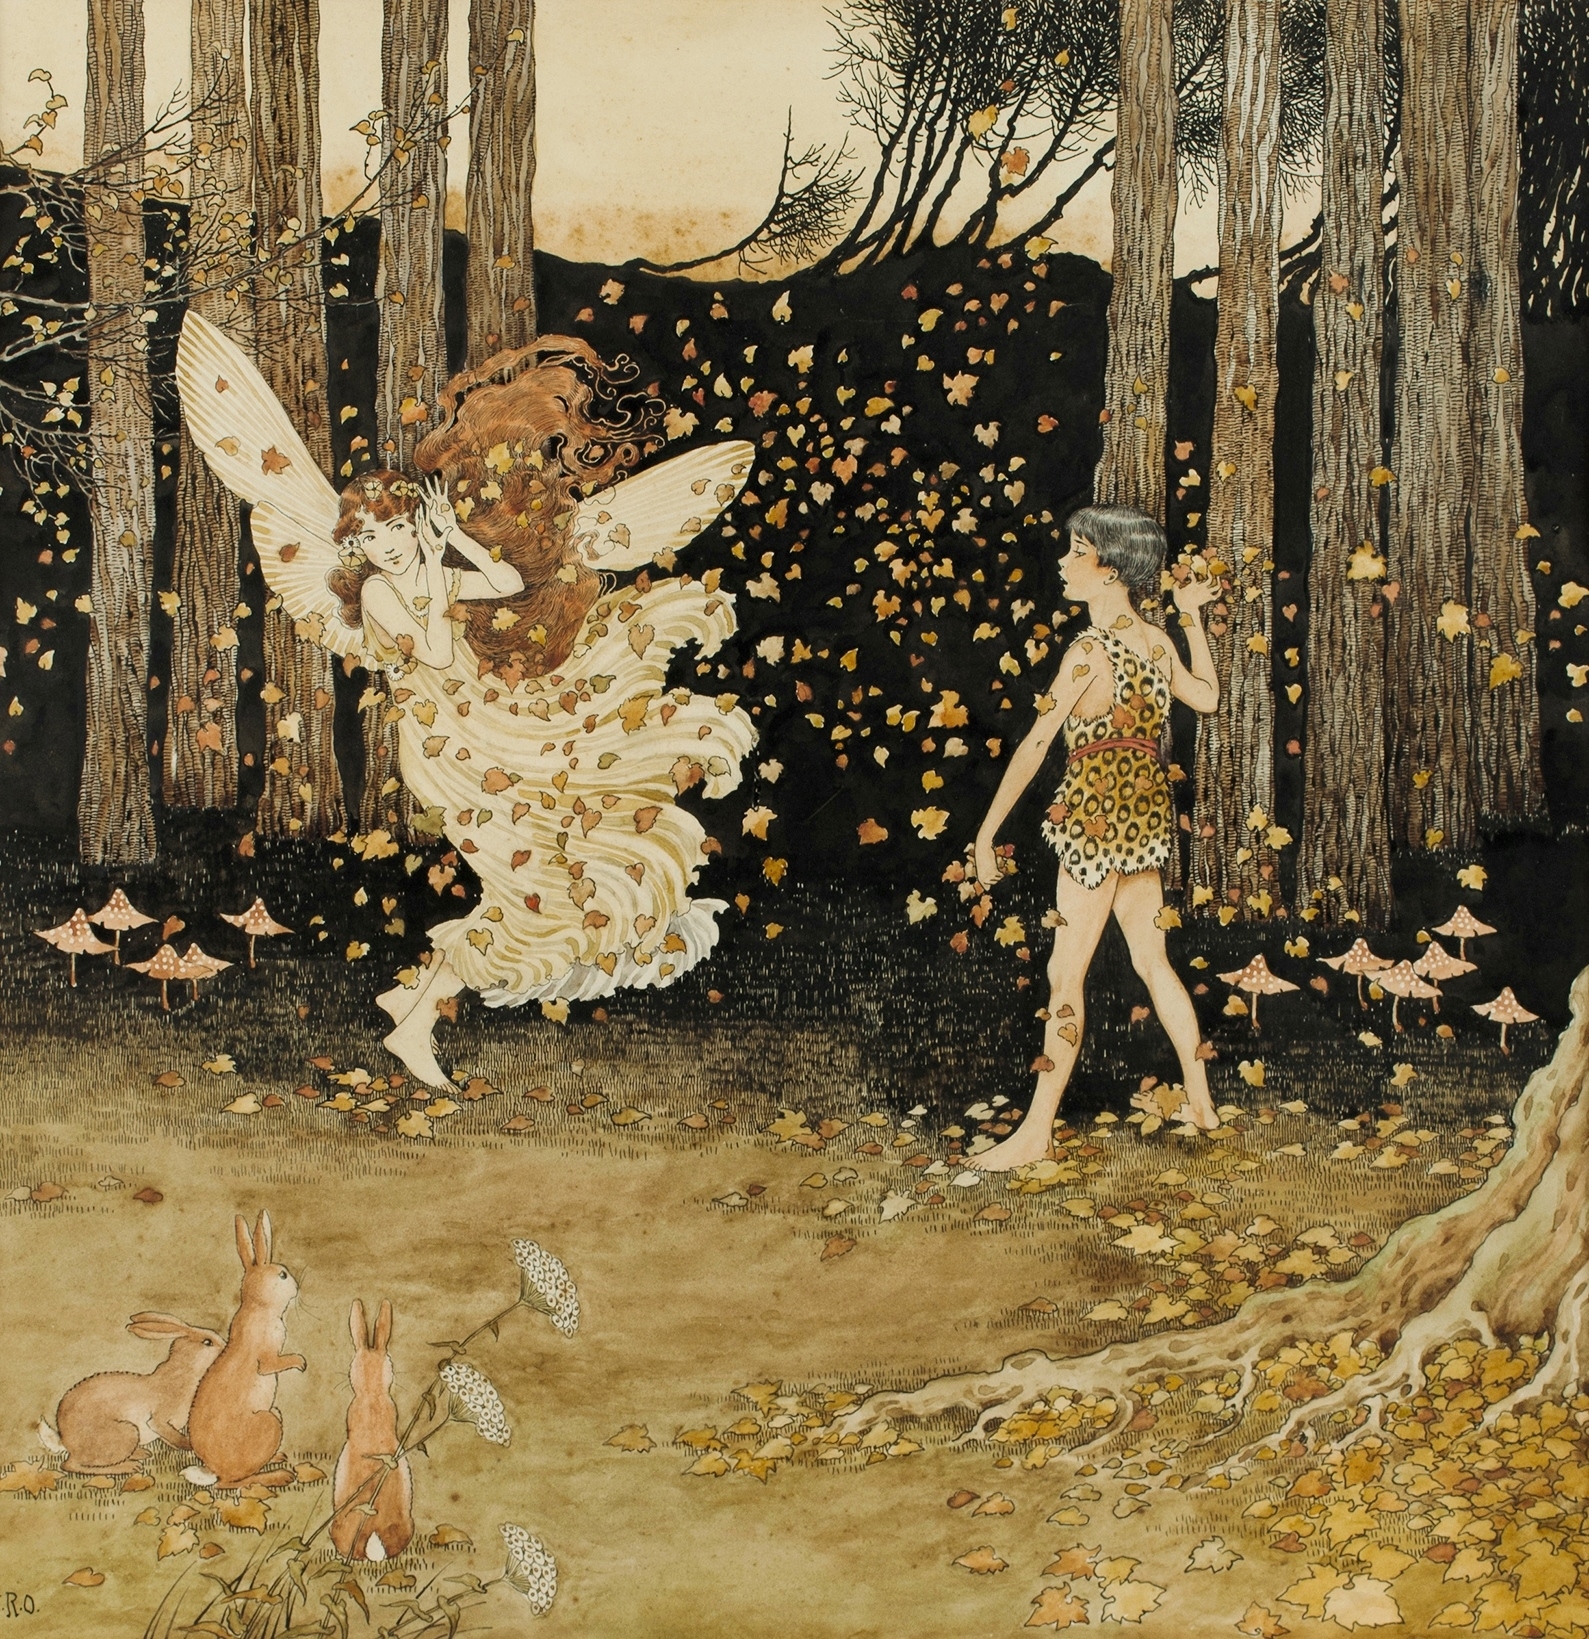 Artwork by Ida Rentoul Outhwaite, An Autumn Revel, Made of Watercolor